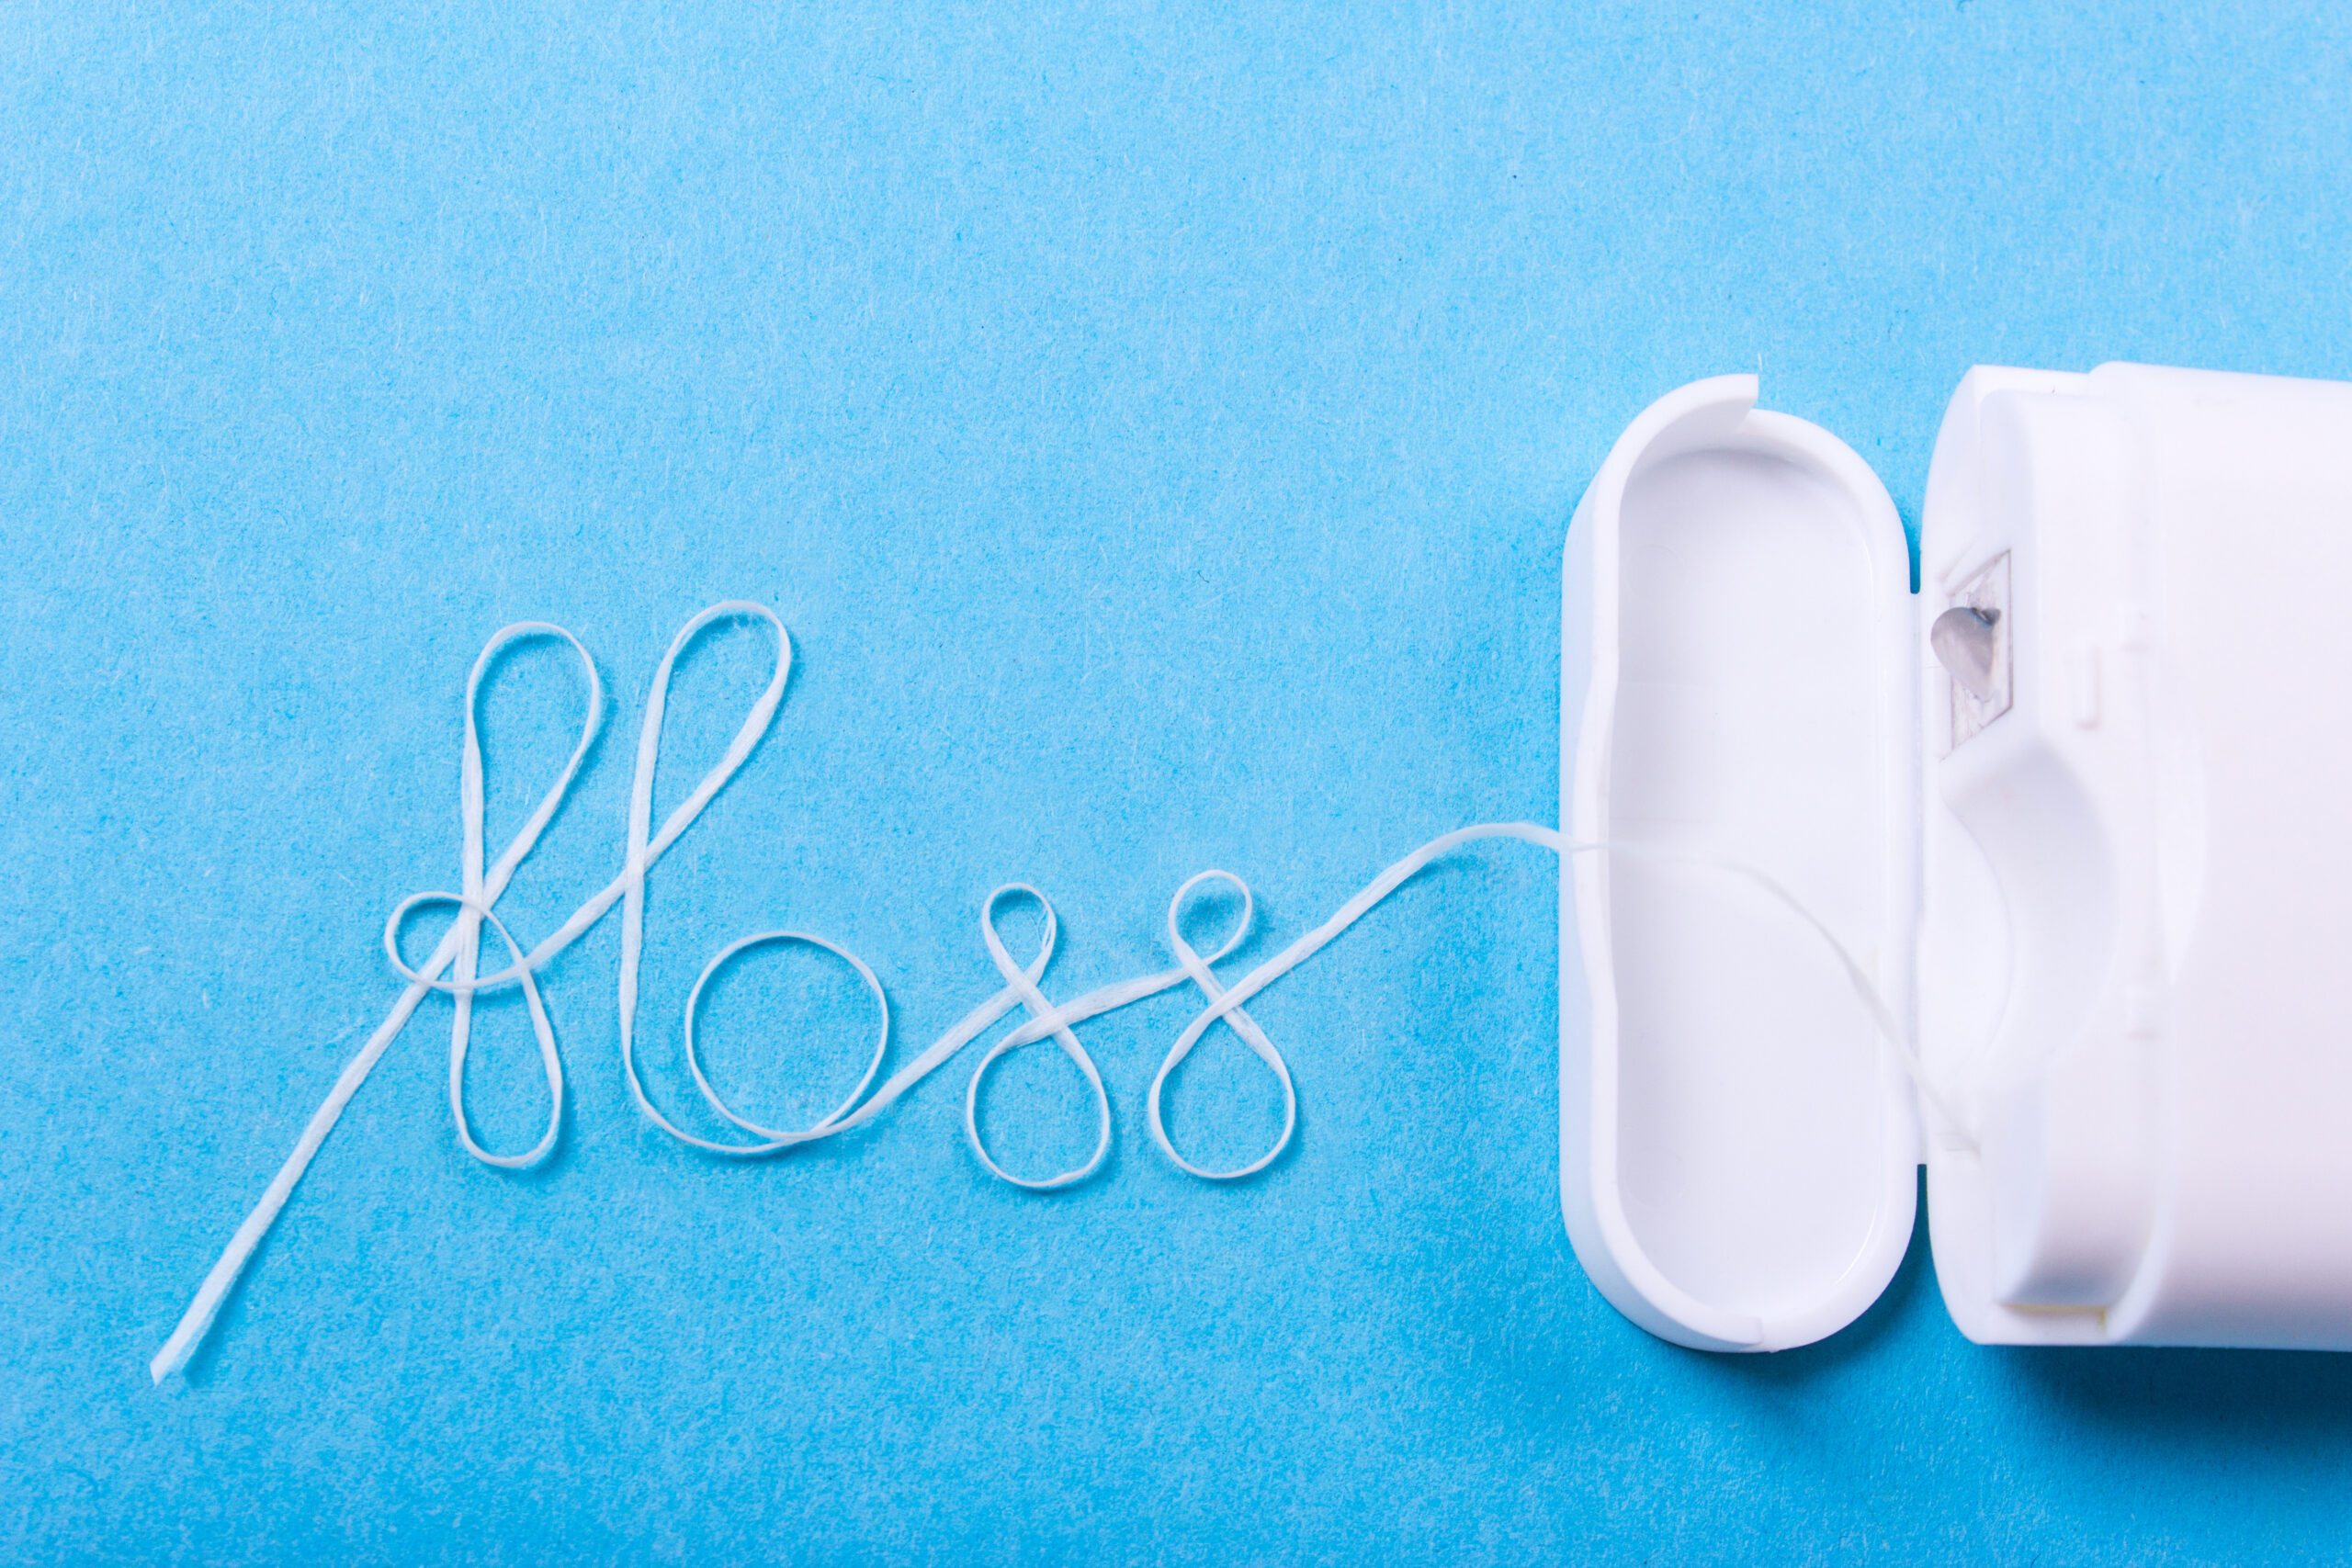 Dental floss word written in letters of floss on a blue background